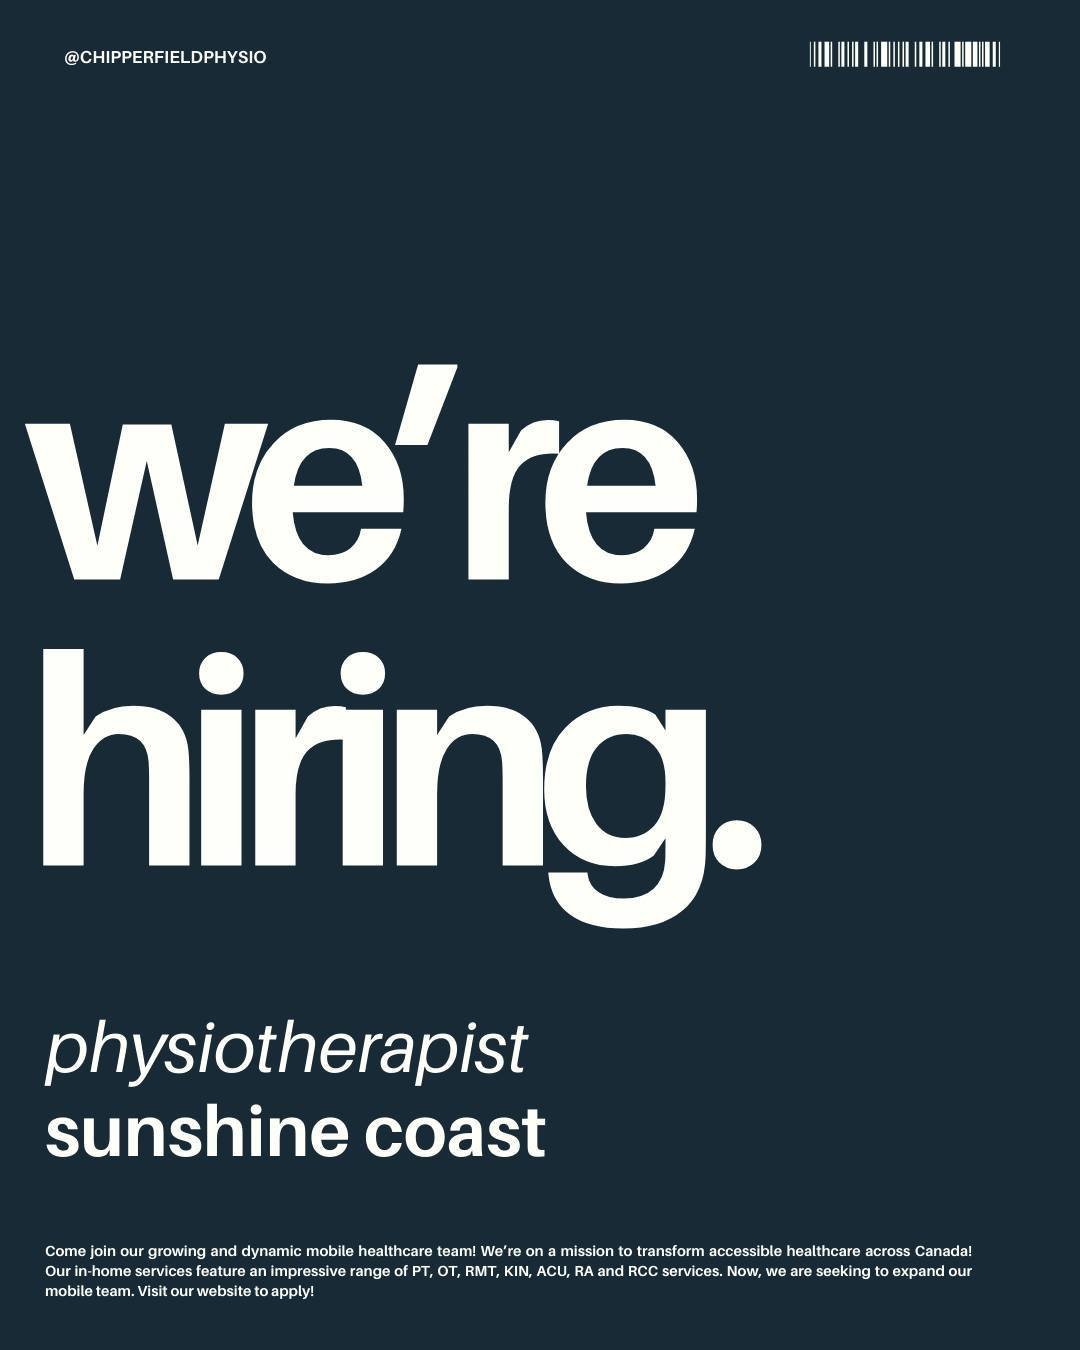 Are you a physiotherapist on the Sunshine Coast? OR do you know a physiotherapist on the Sunshine Coast?! 👀

Send them this post! 📤

And if you're interested, you can send your resume to hireme@chipperfieldphysio.ca 🤘